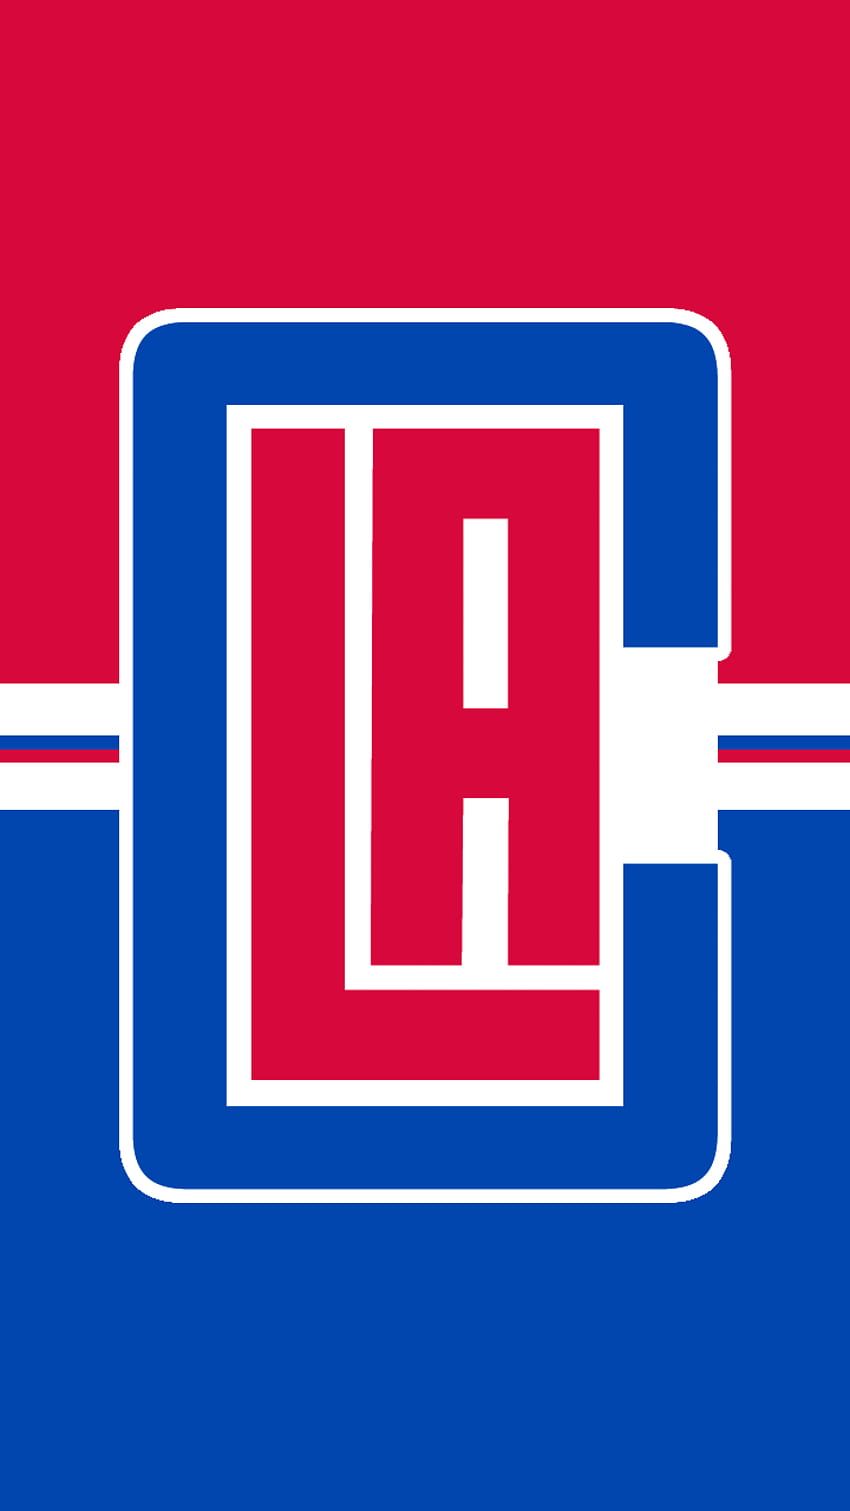 Membuat Clippers Mobile! : LAClippers, Los Angeles Clippers wallpaper ponsel HD